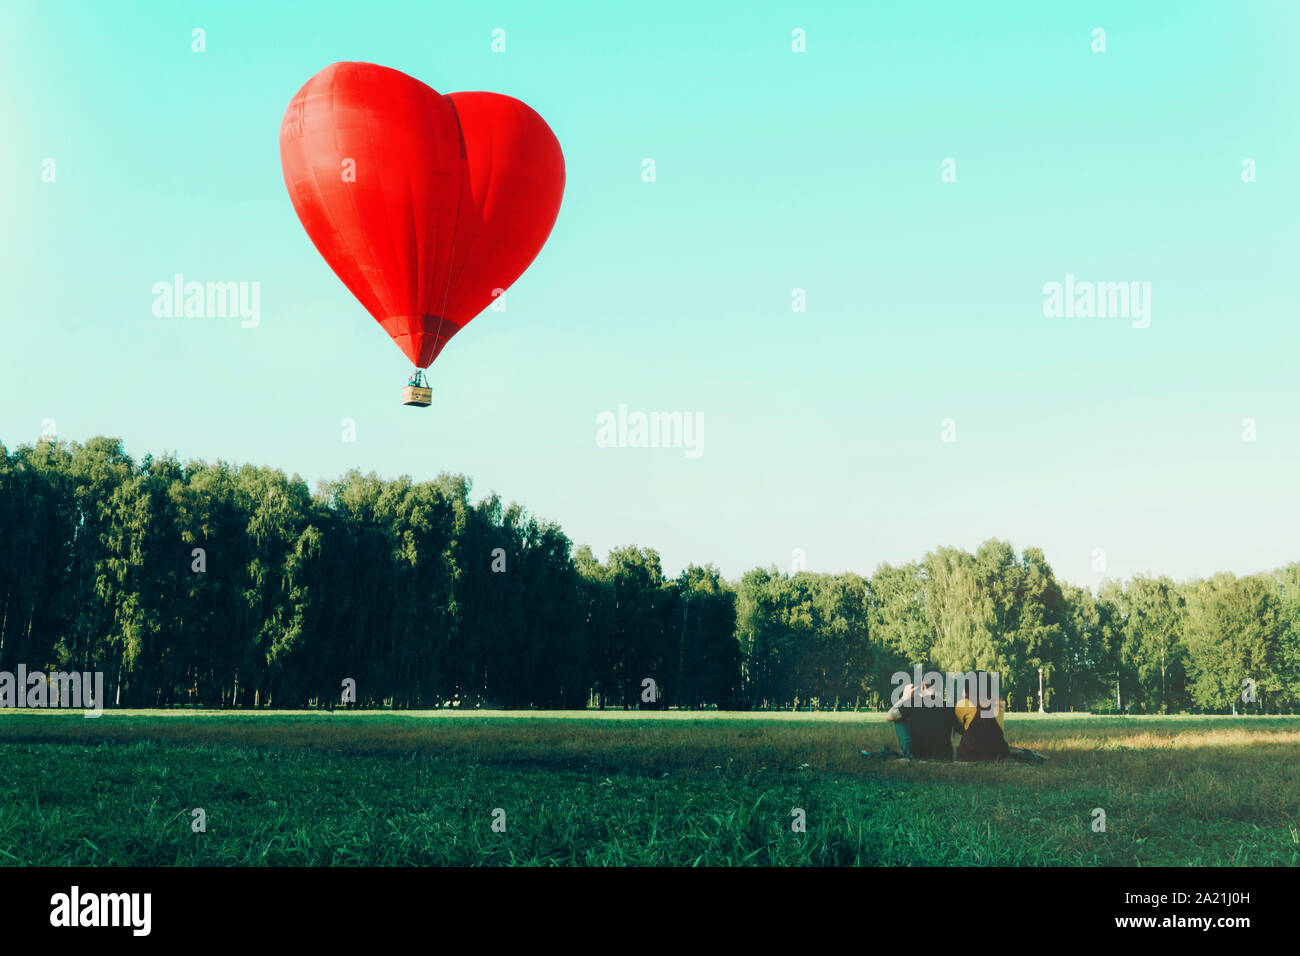 Young woman and man sitting on grass and looking at red hot air balloon in shape of heart. Love and future together concept. Stock Photo